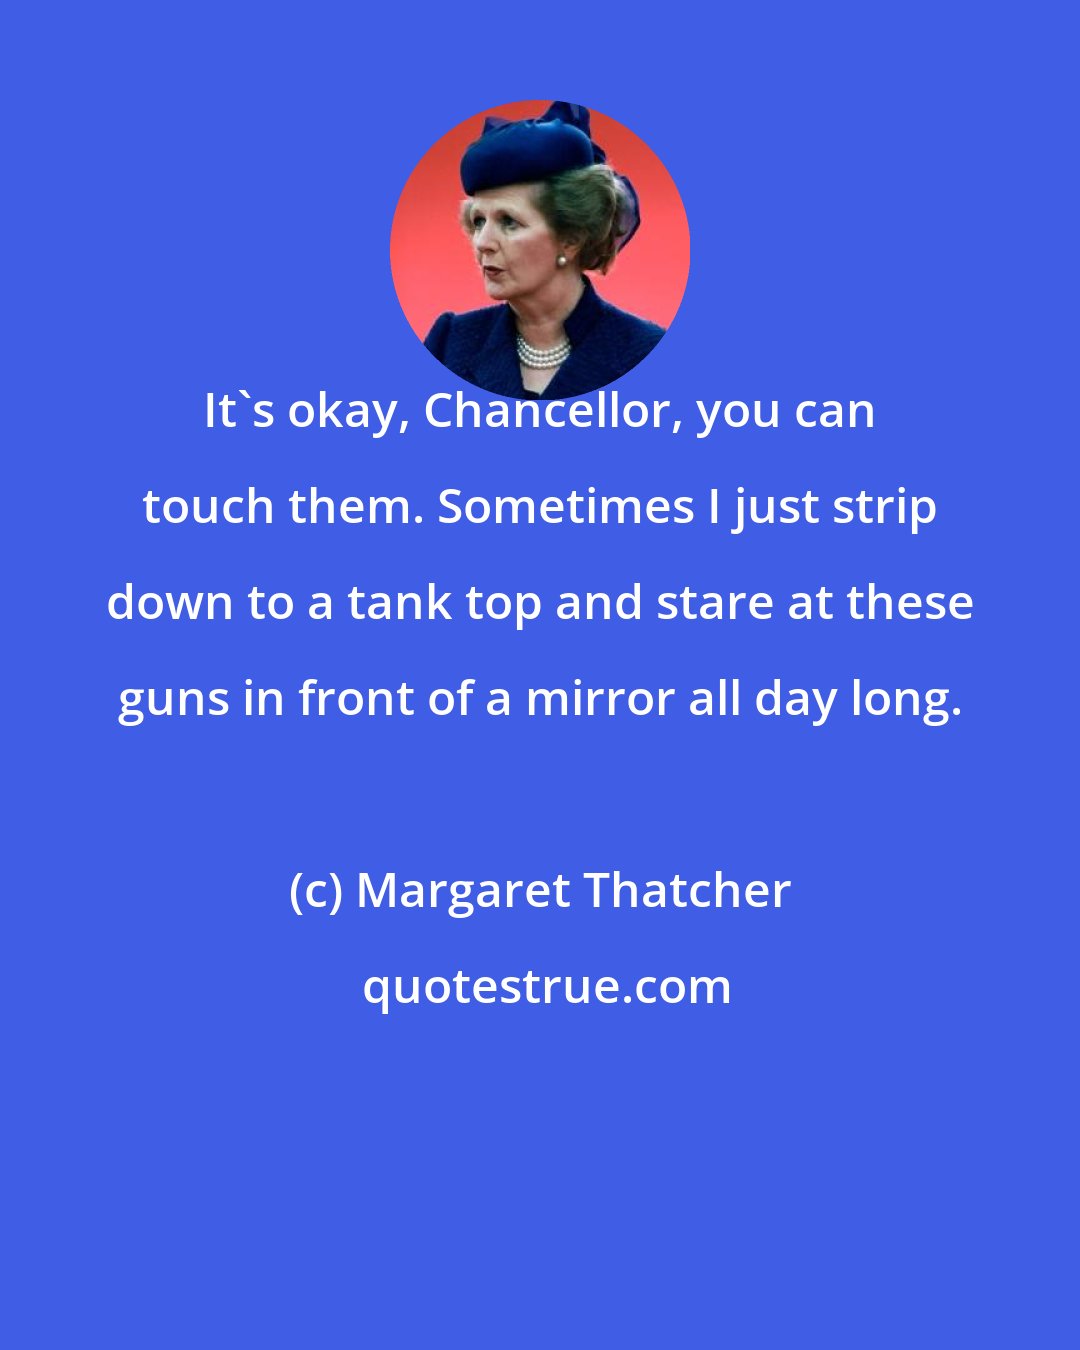 Margaret Thatcher: It's okay, Chancellor, you can touch them. Sometimes I just strip down to a tank top and stare at these guns in front of a mirror all day long.